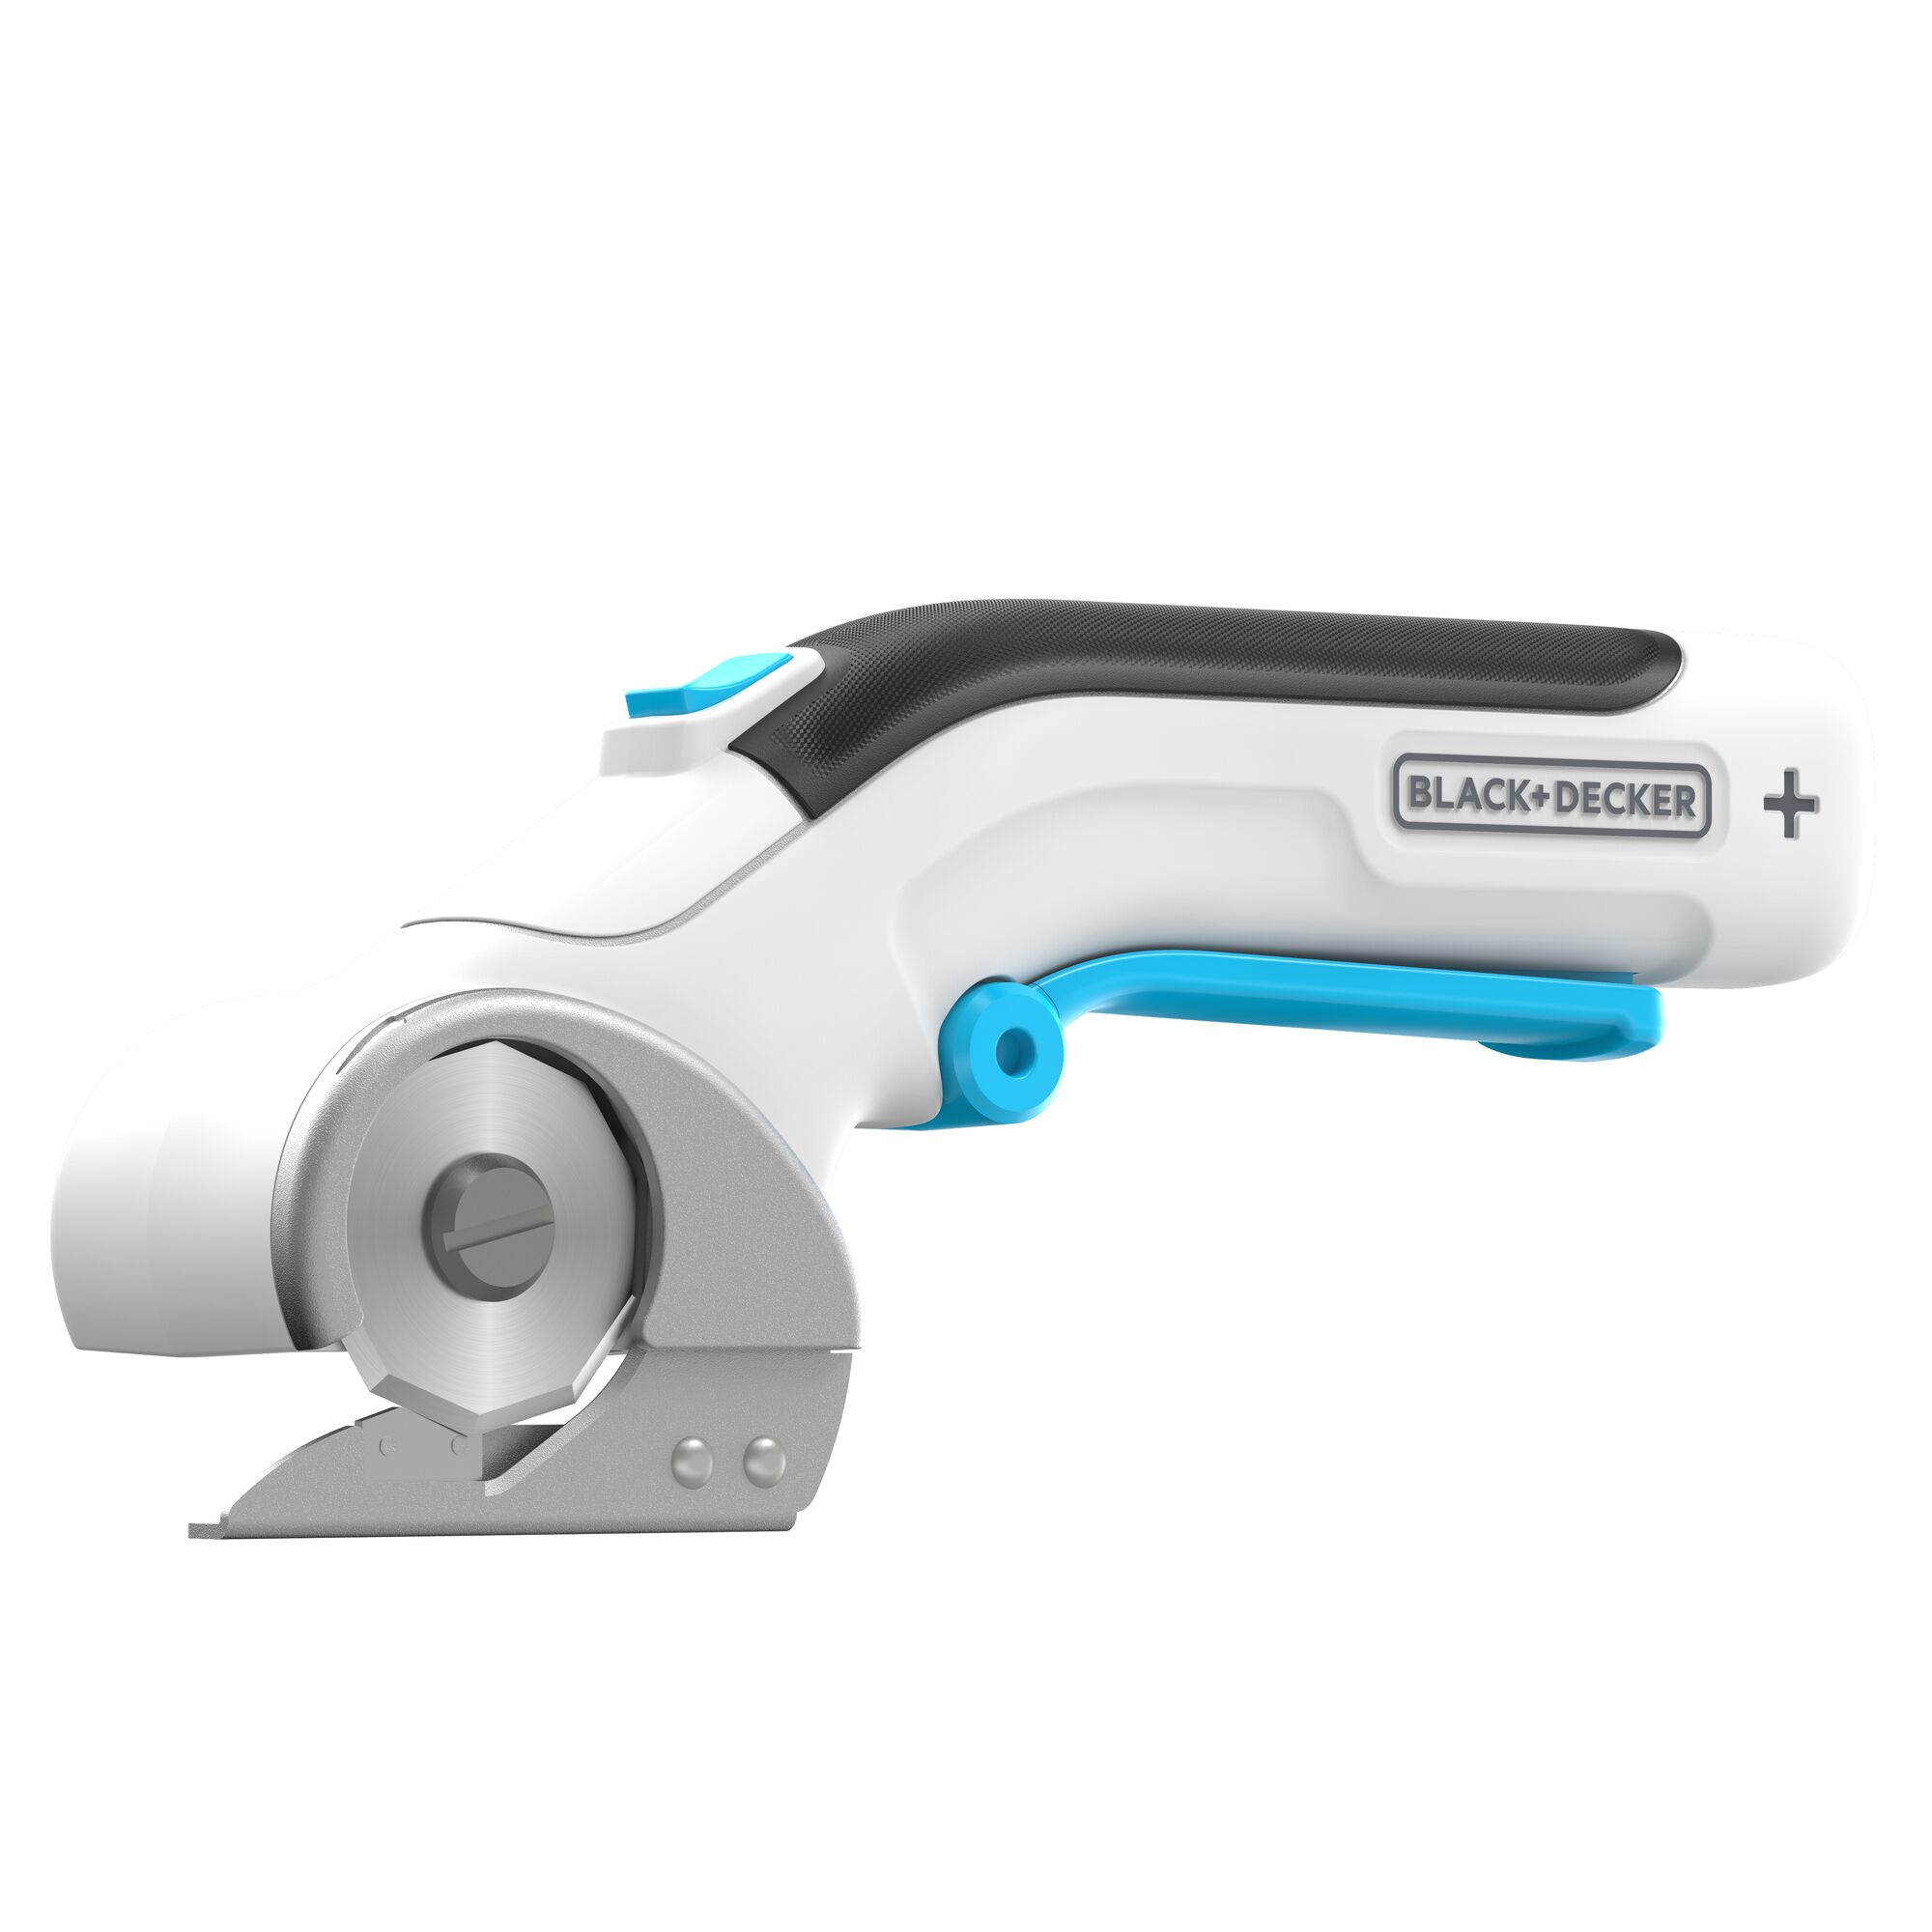 Profile of 4 volt rotary cutter